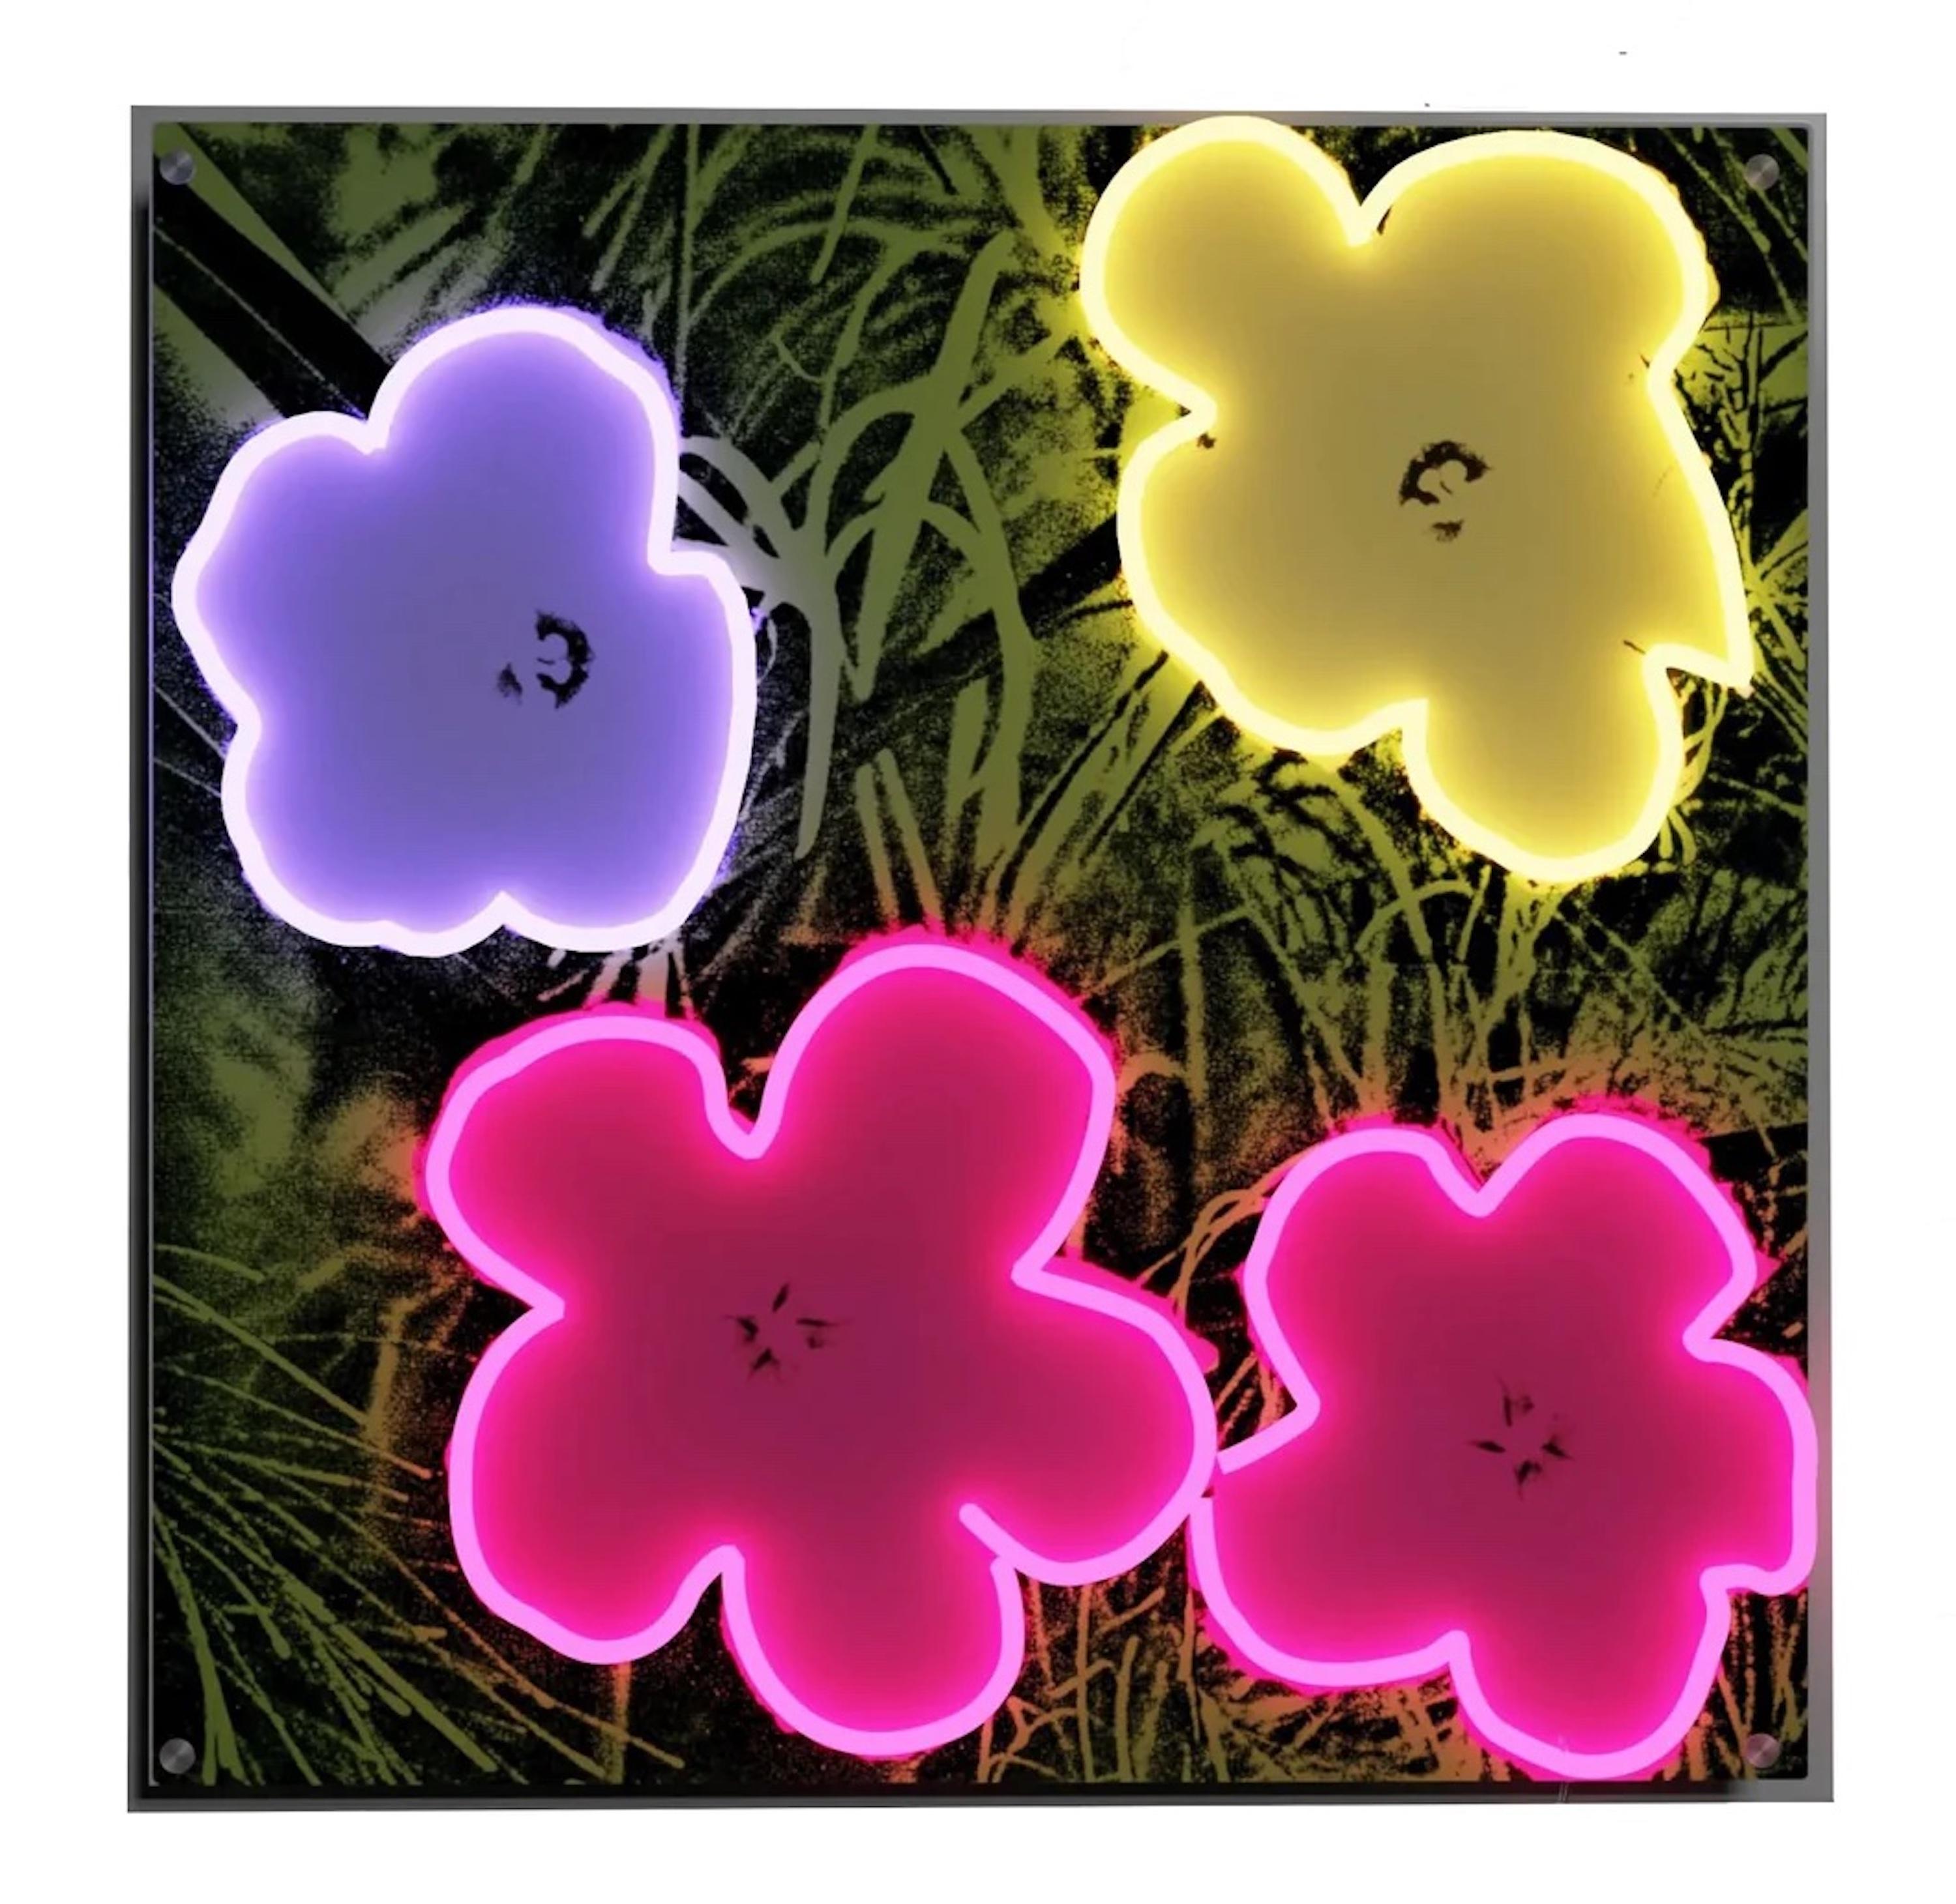 Yellowpop Neon Flowers lighted Wall Hanging/Sign - brand new in box